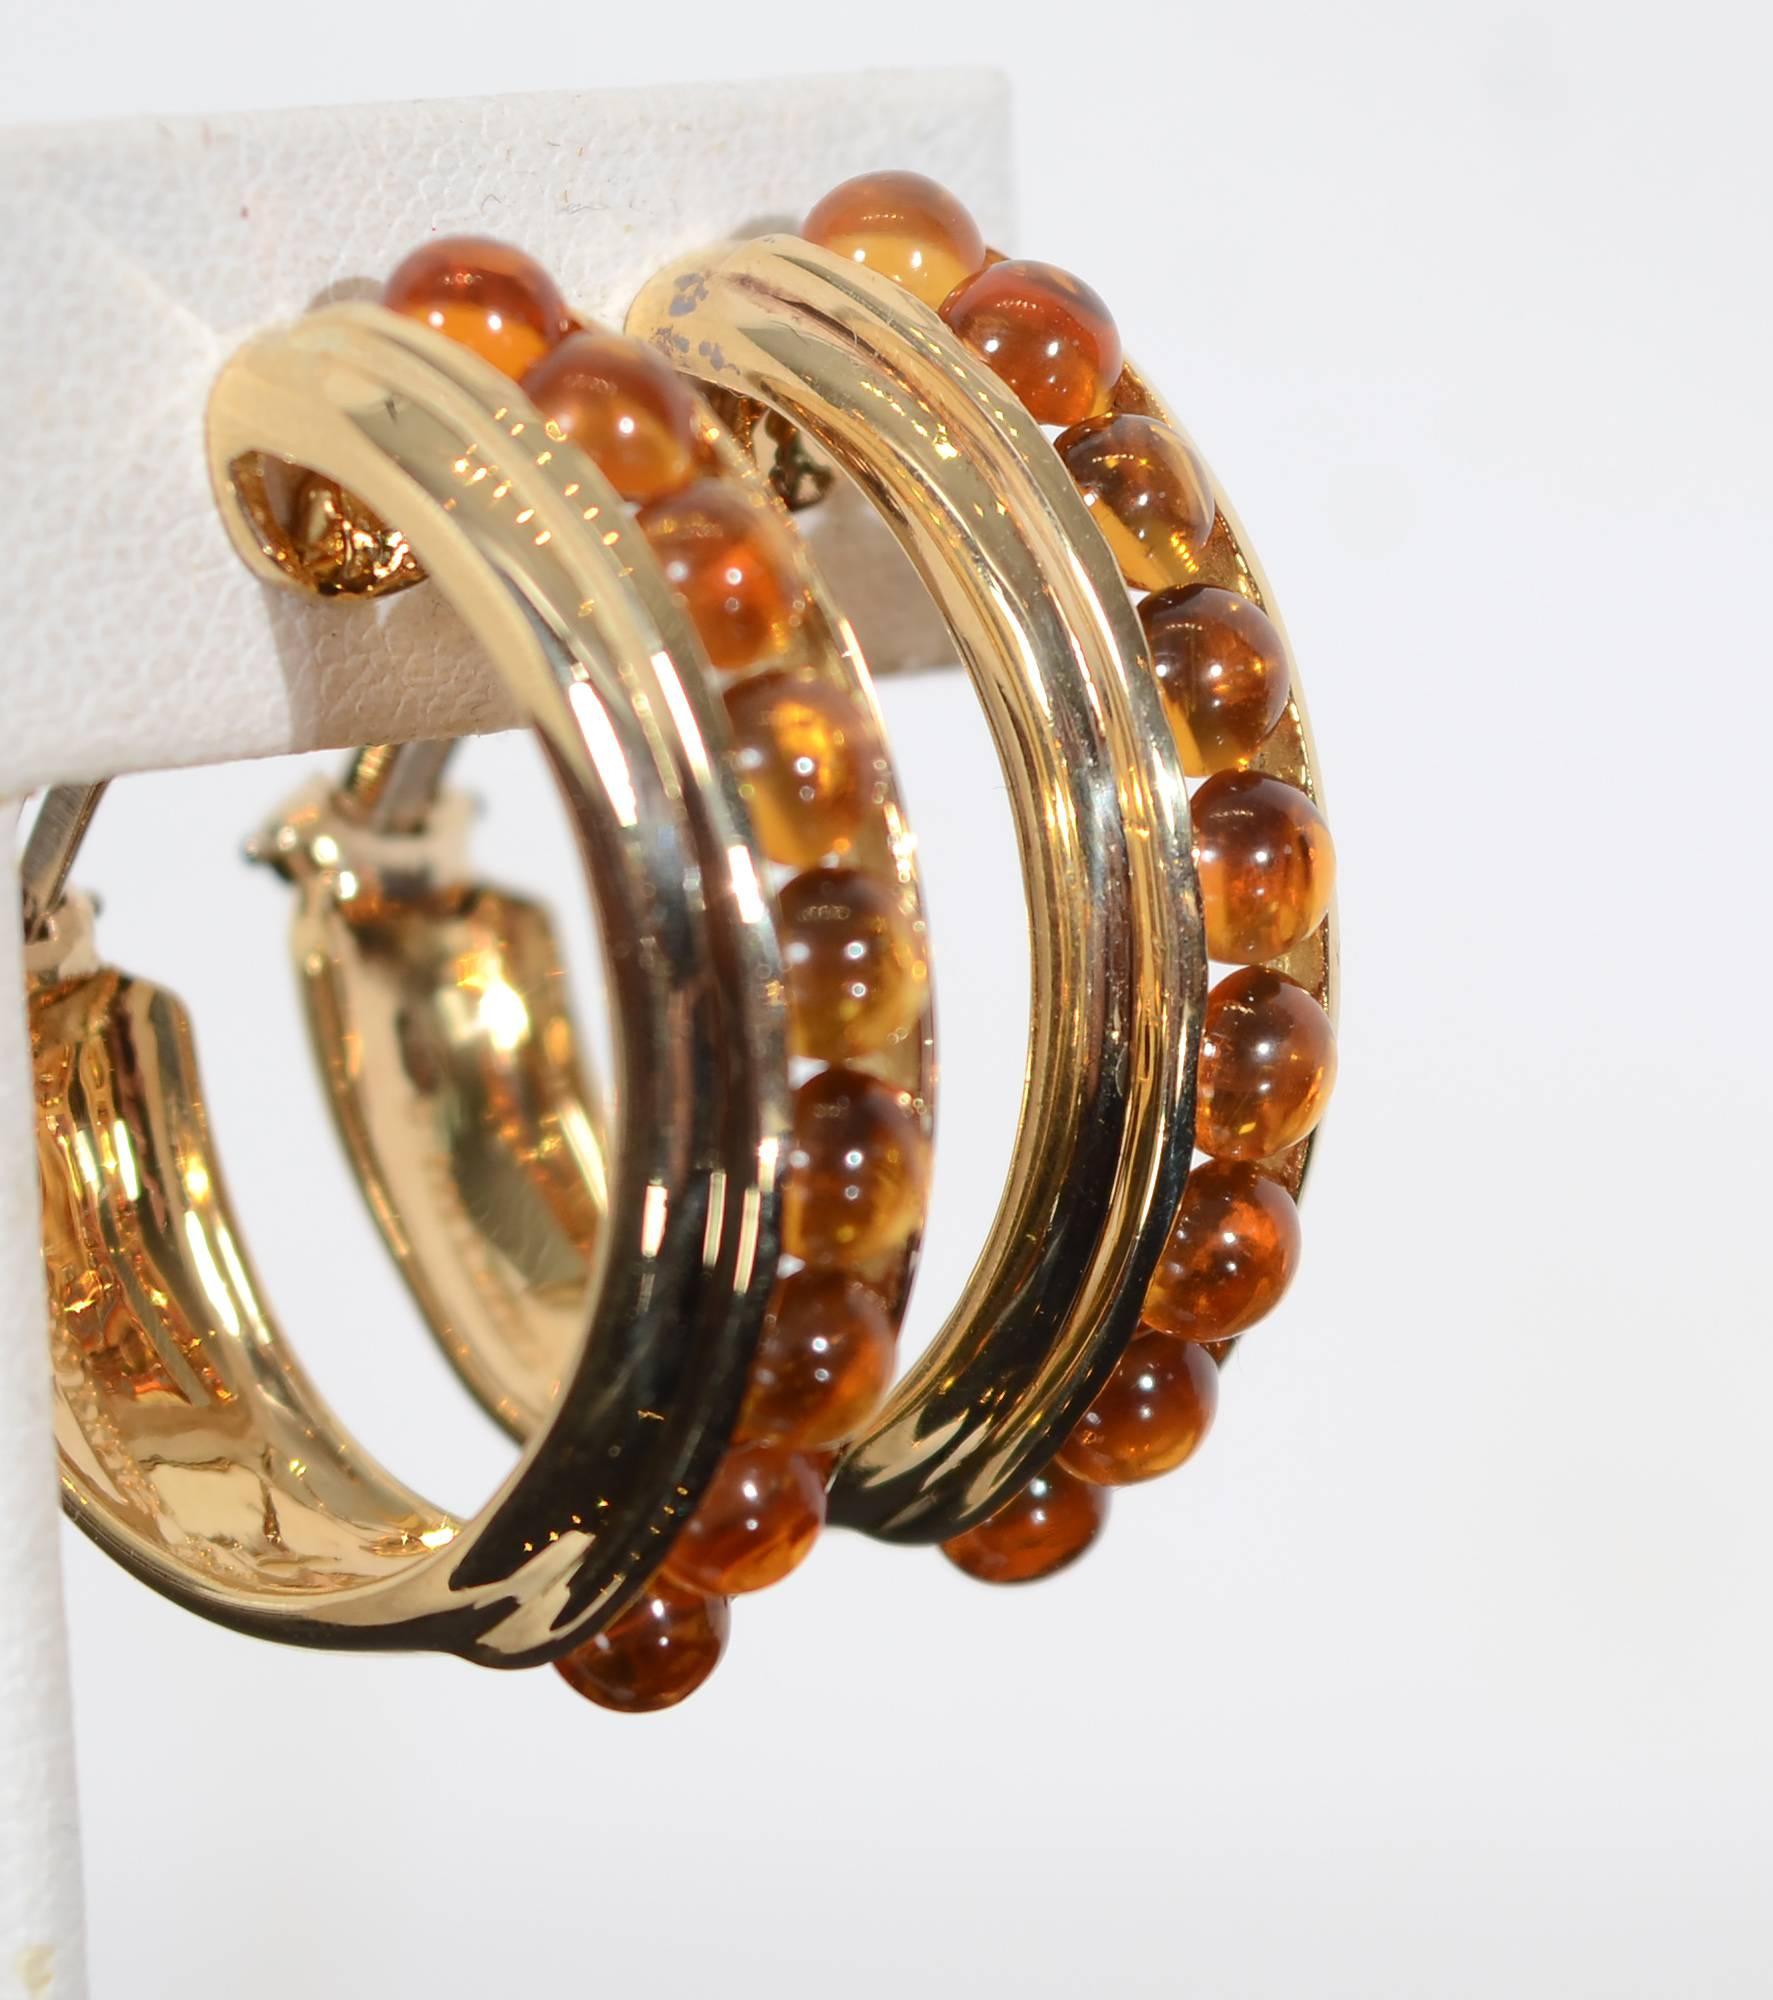 These hoop earrings are slightly oval in shape with 9 cabochon citrines in each one. The sides are nicely banded. Clip backs can be converted to posts.